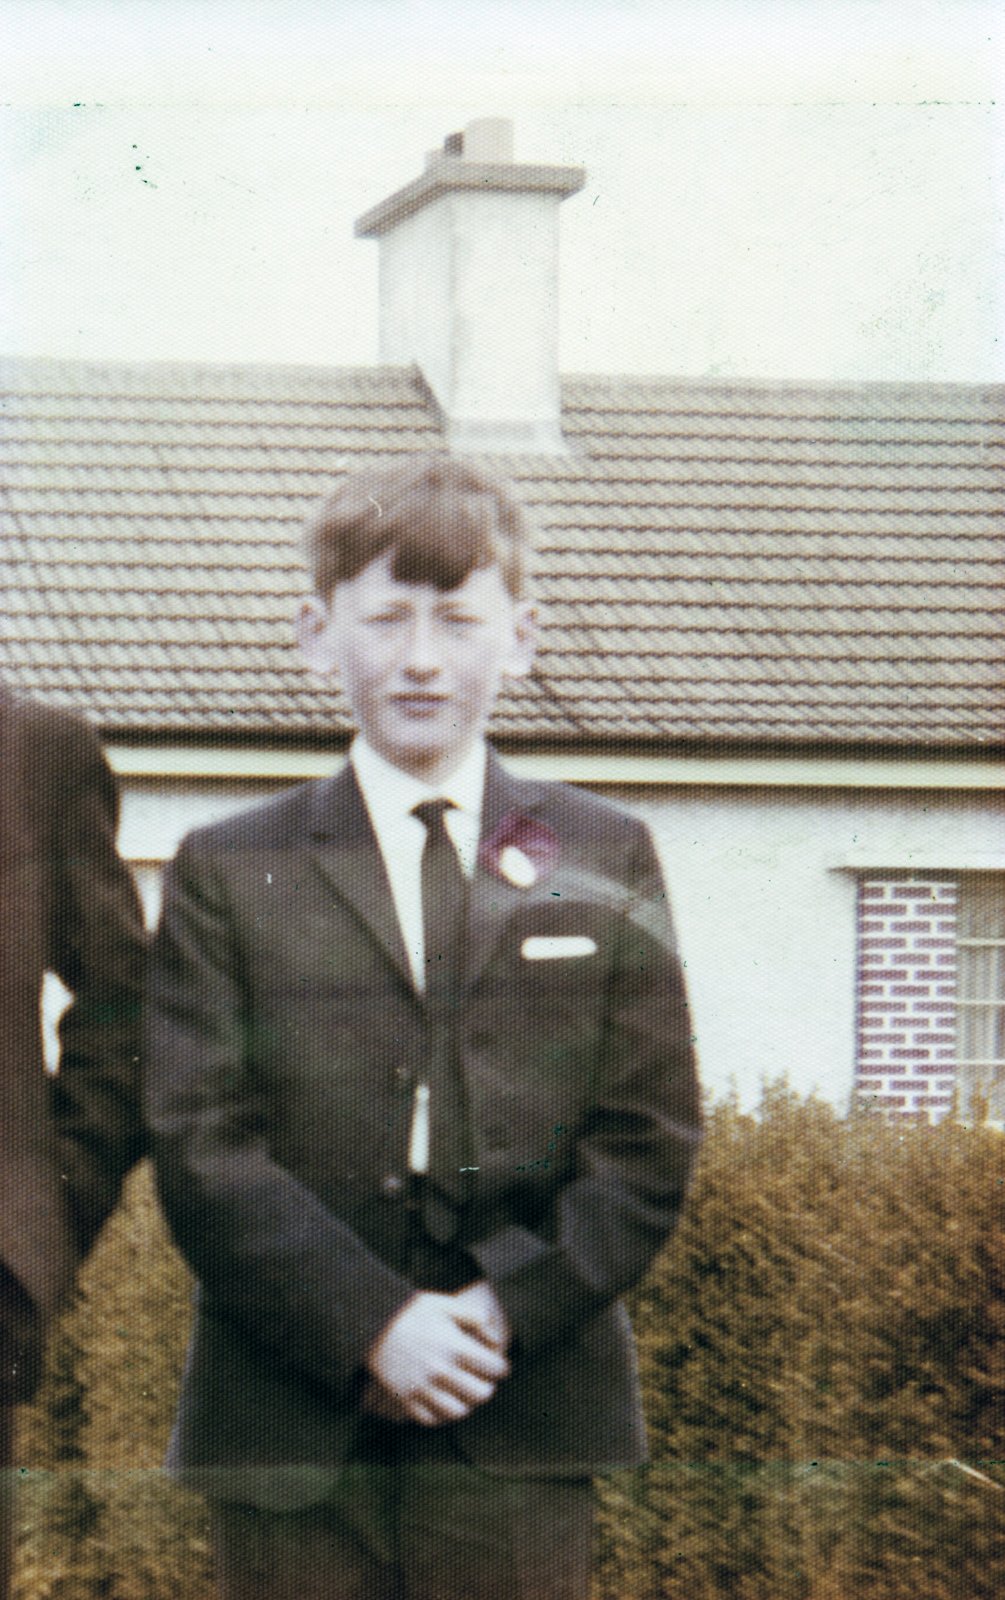 Confirmation photo of Austin McGing Junior taken at his house (Irish Land Commission in style) in Moynalvey, County Meath c. 1970.